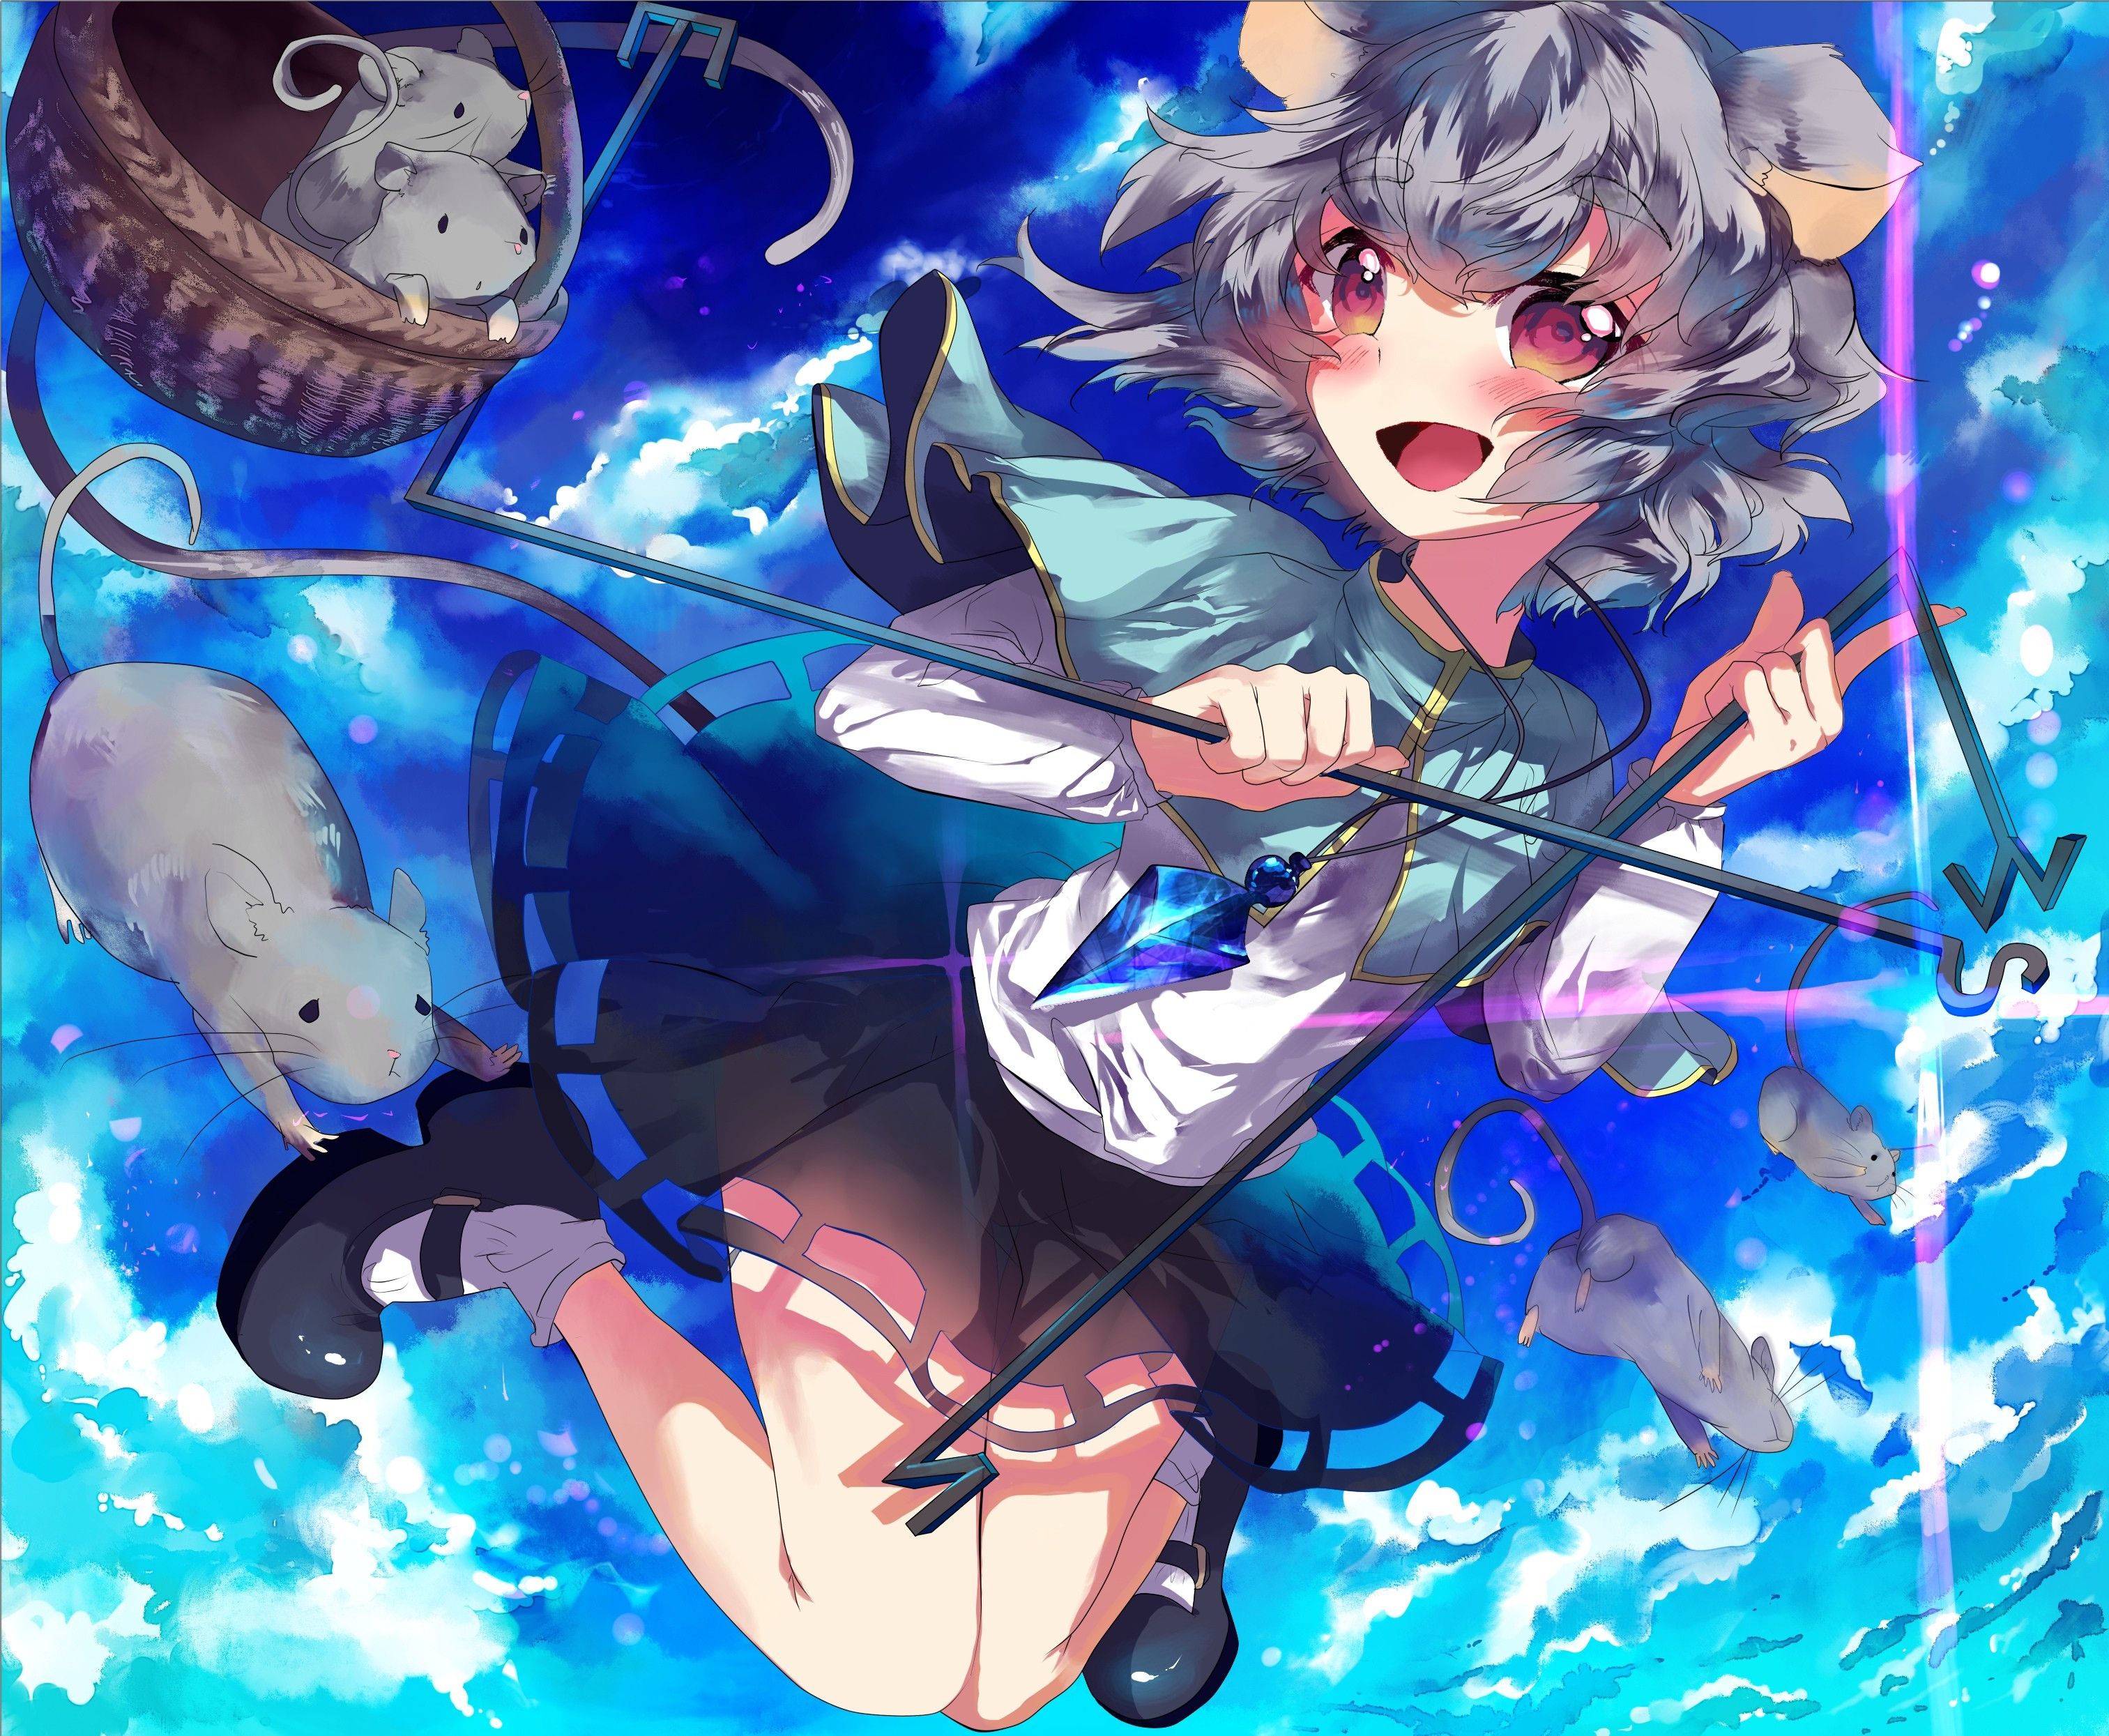 clouds touhou dress animal ears red eyes anime mice nazrin anime girls silver hair 3025x2490 wall High Quality Wallpaper, High Definition Wallpaper